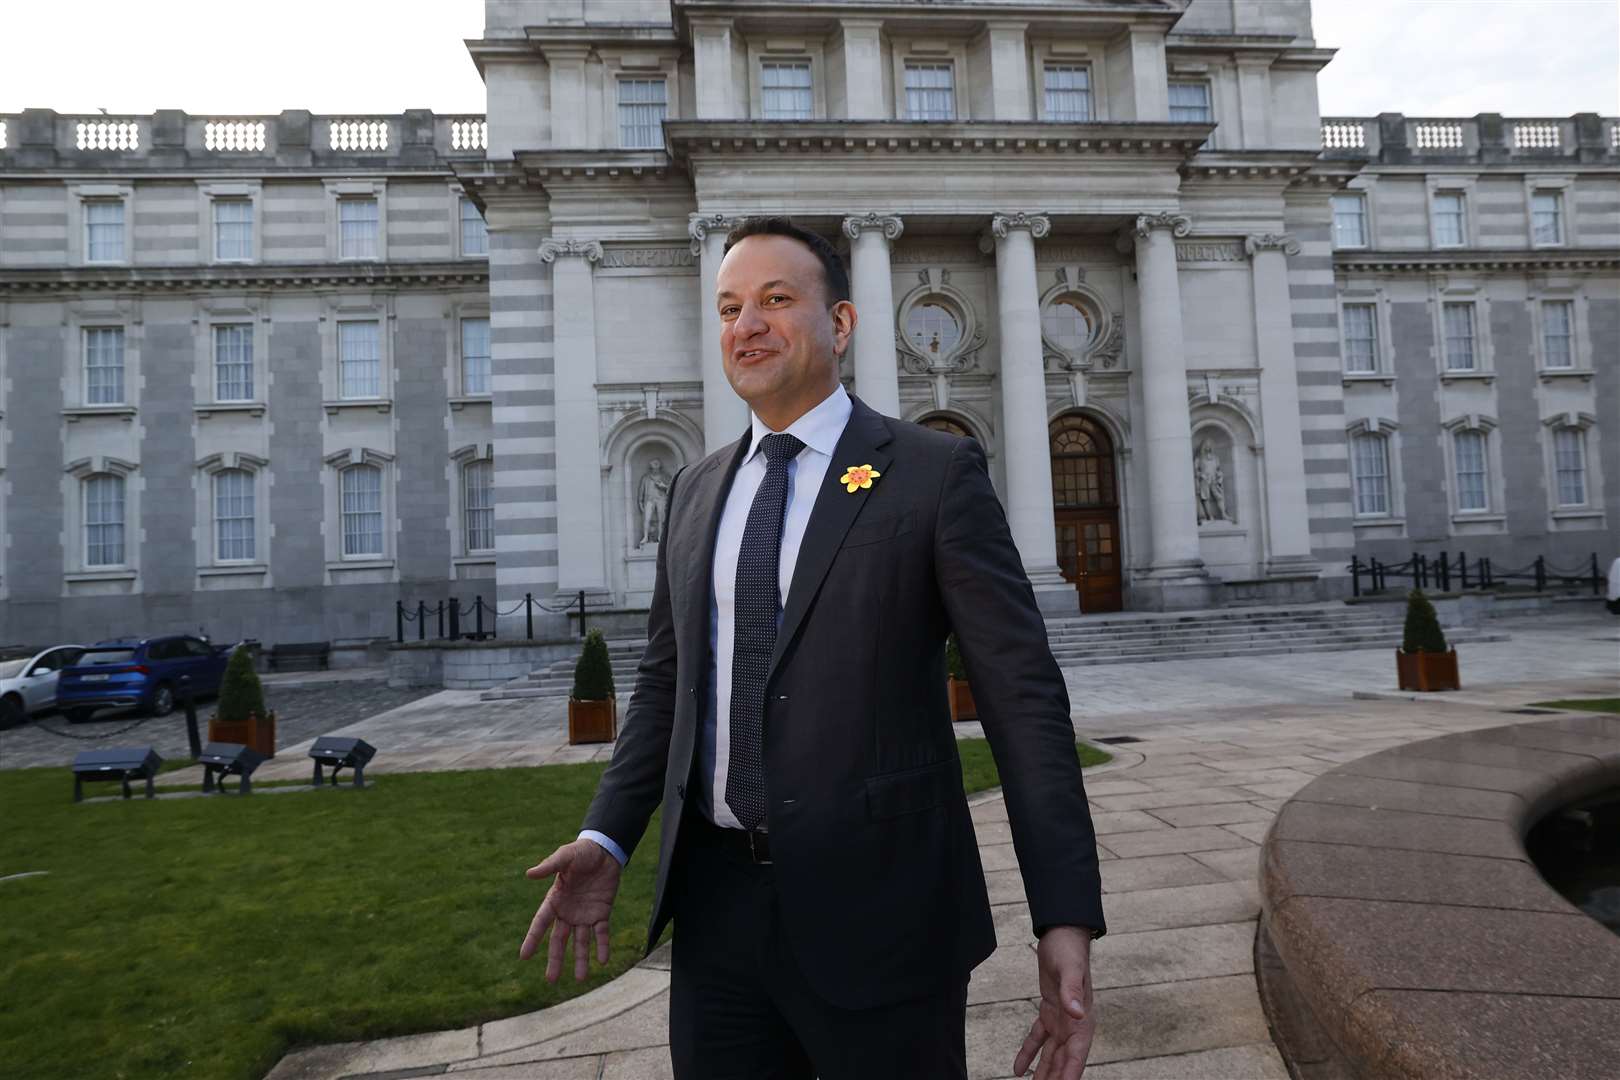 Leo Varadkar said whoever becomes the next Fine Gael leader will have his full support (Nick Bradshaw/PA)